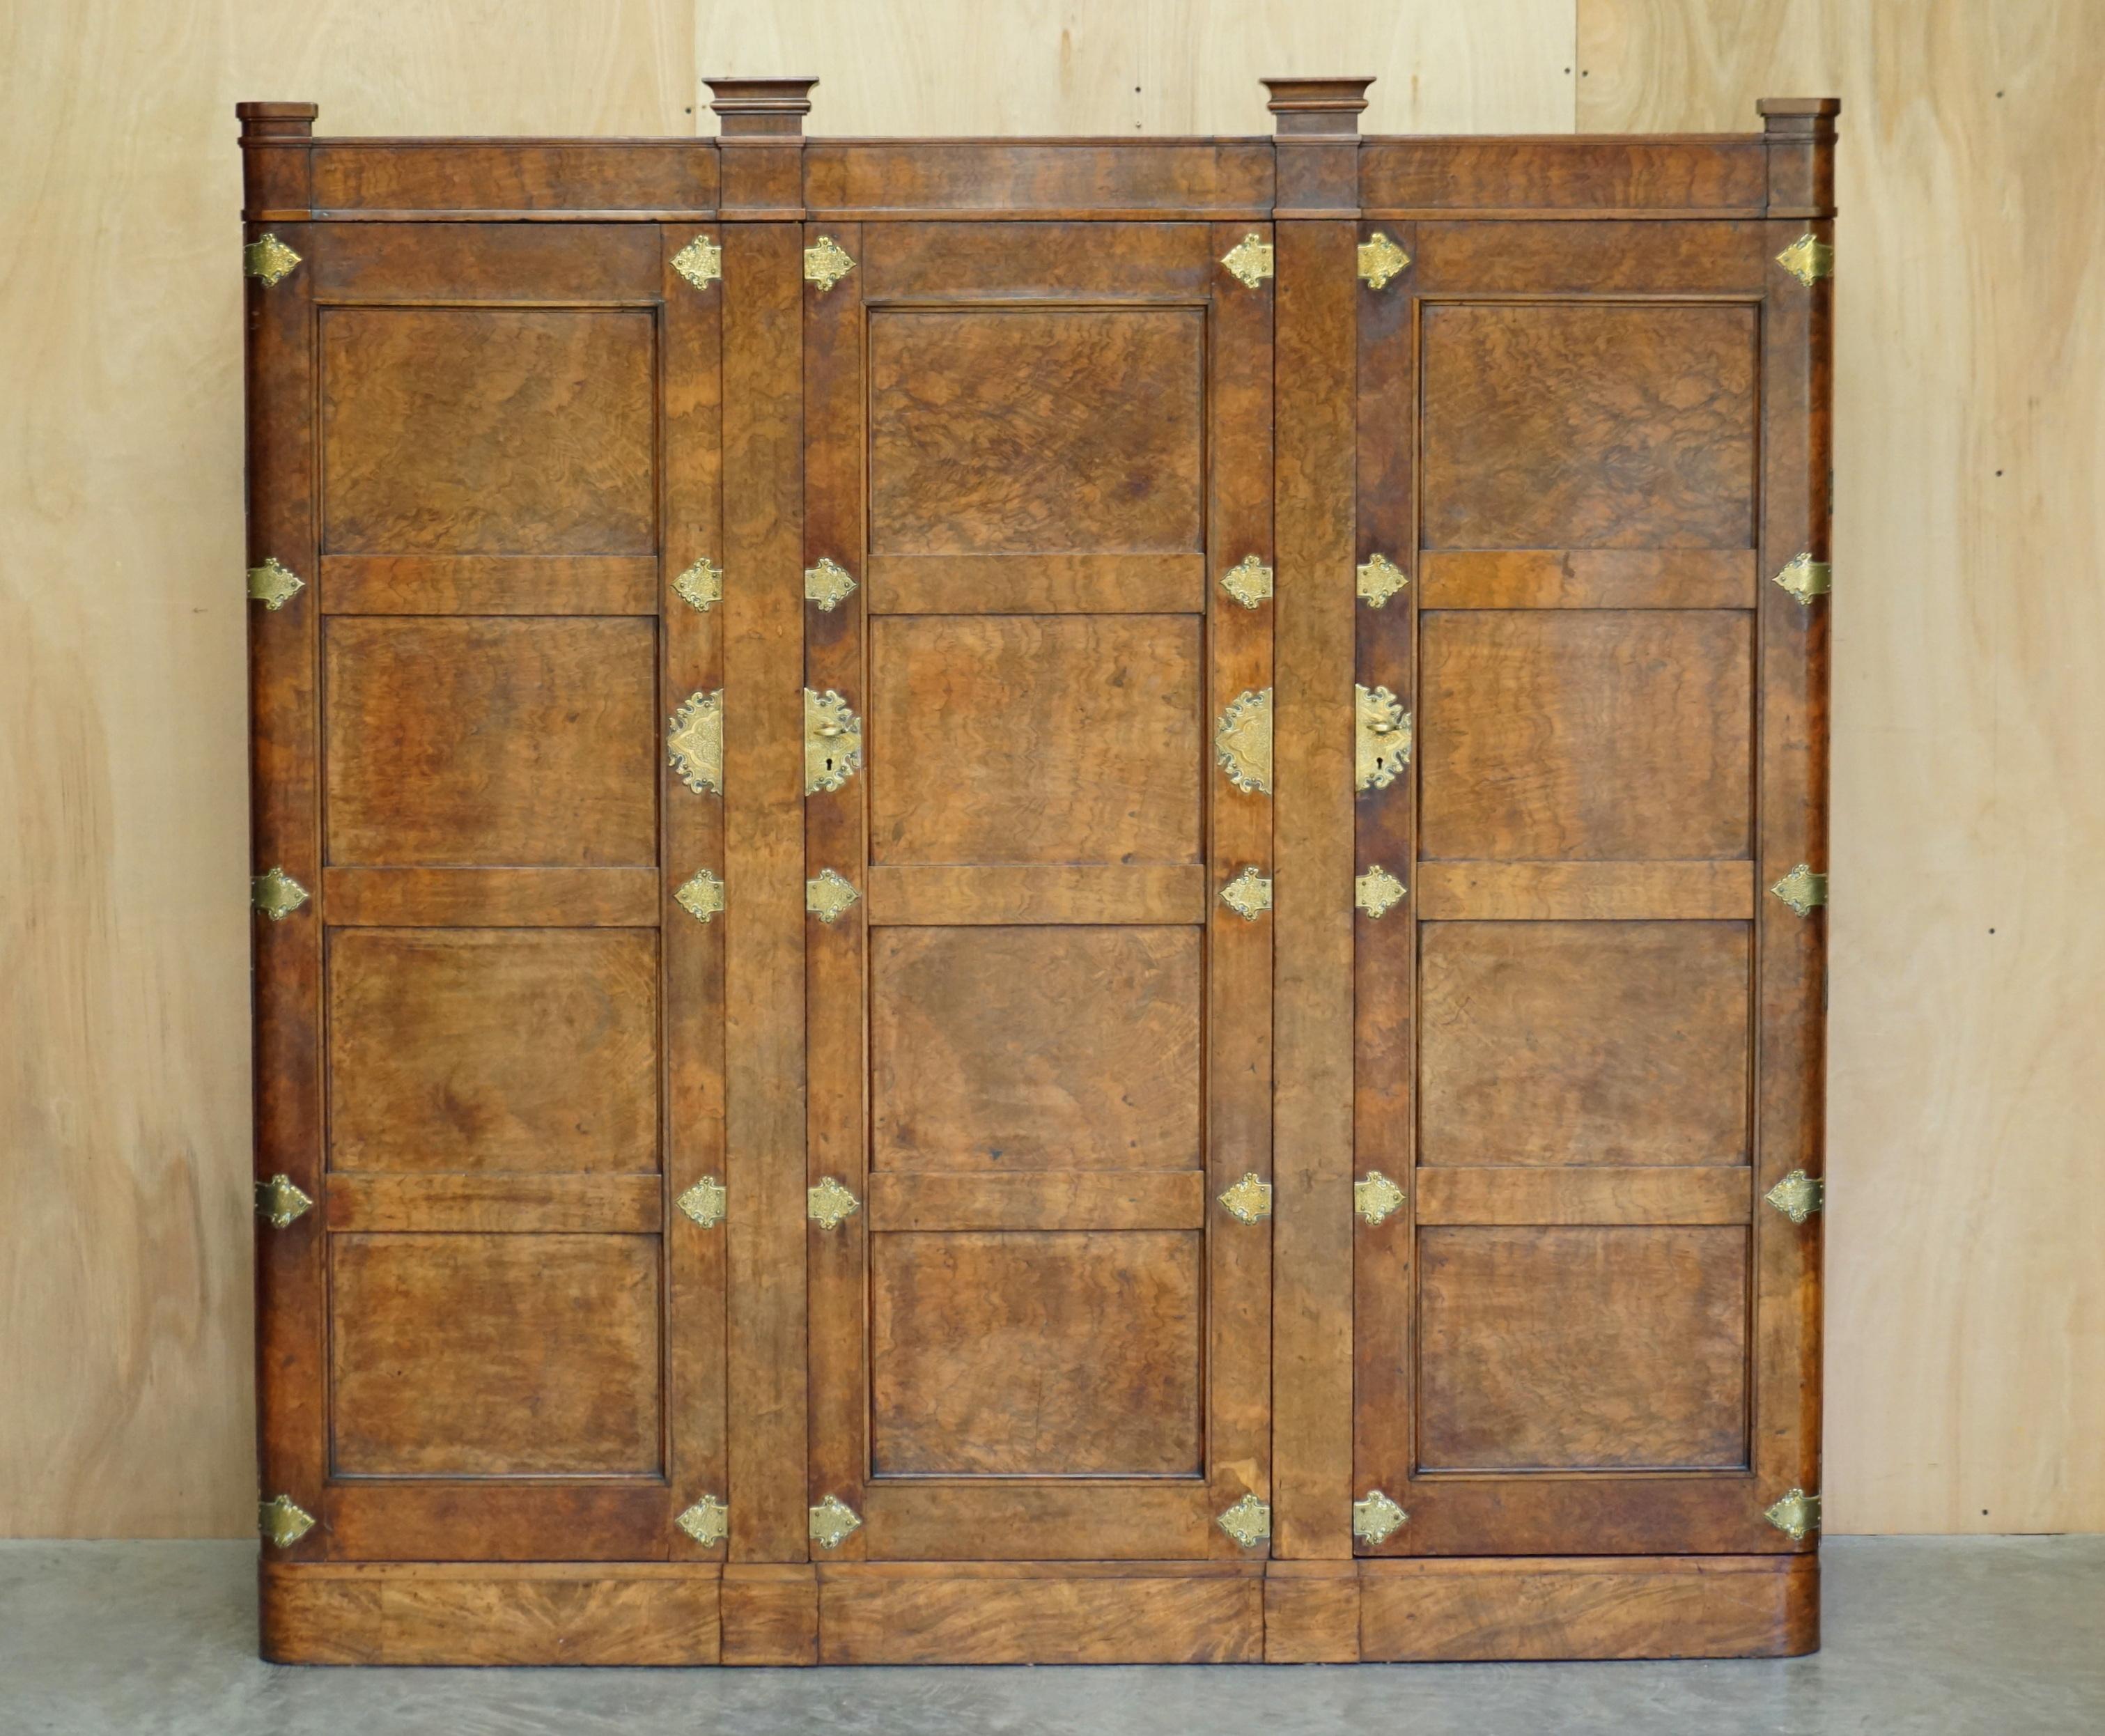 We are delighted to offer for sale this very rare and important, Museum quality, Gothic style Antique Burr & Burl Walnut wardrobe with oversized, polished brass fittings

This piece is part of a suite, I have the matching dressing table listed